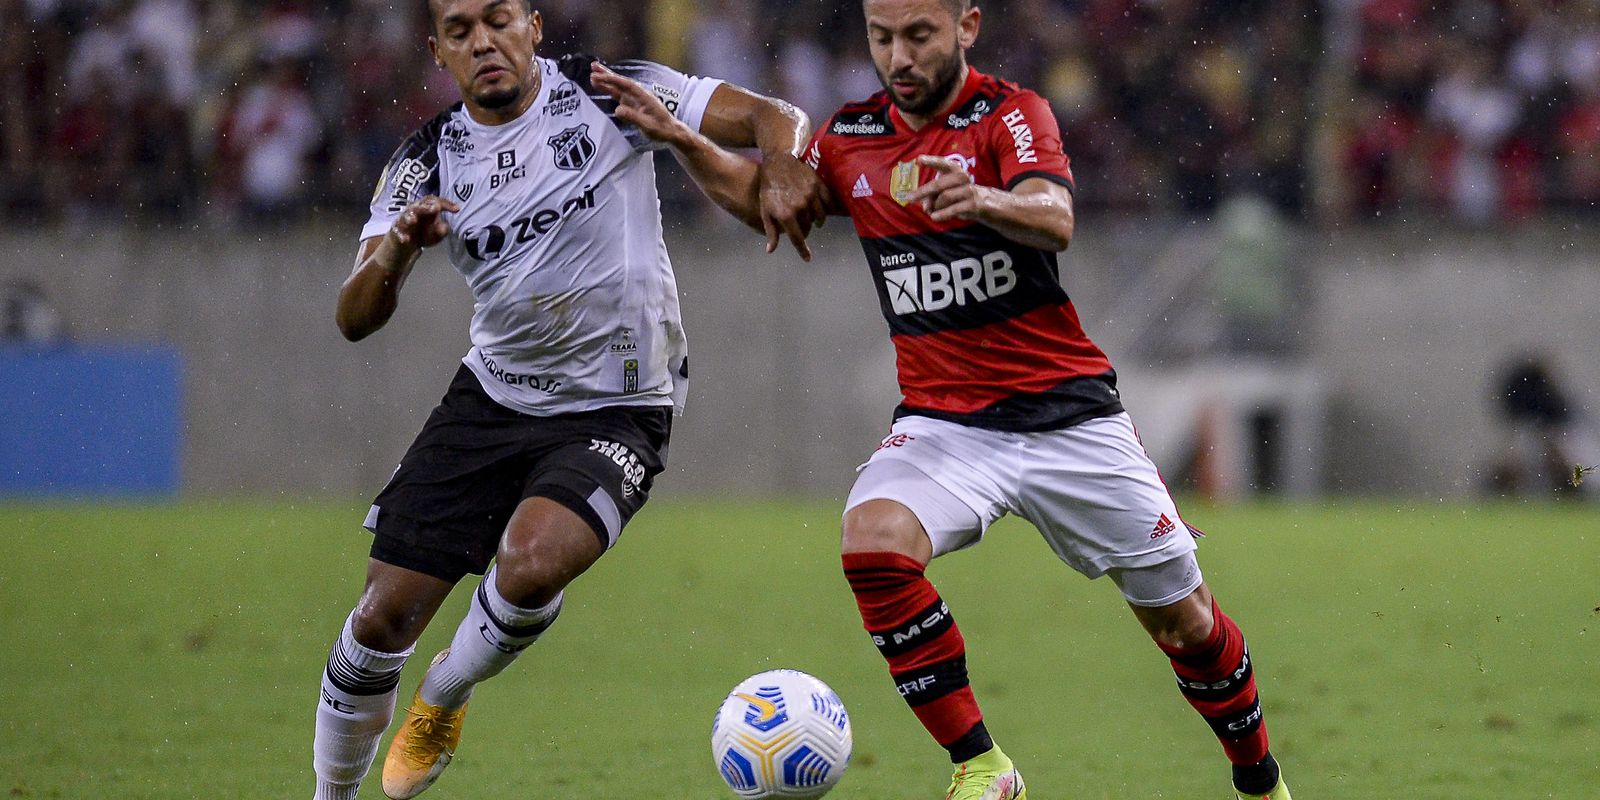 Ceará and Flamengo duel to scare away bad phase in Brasileirão